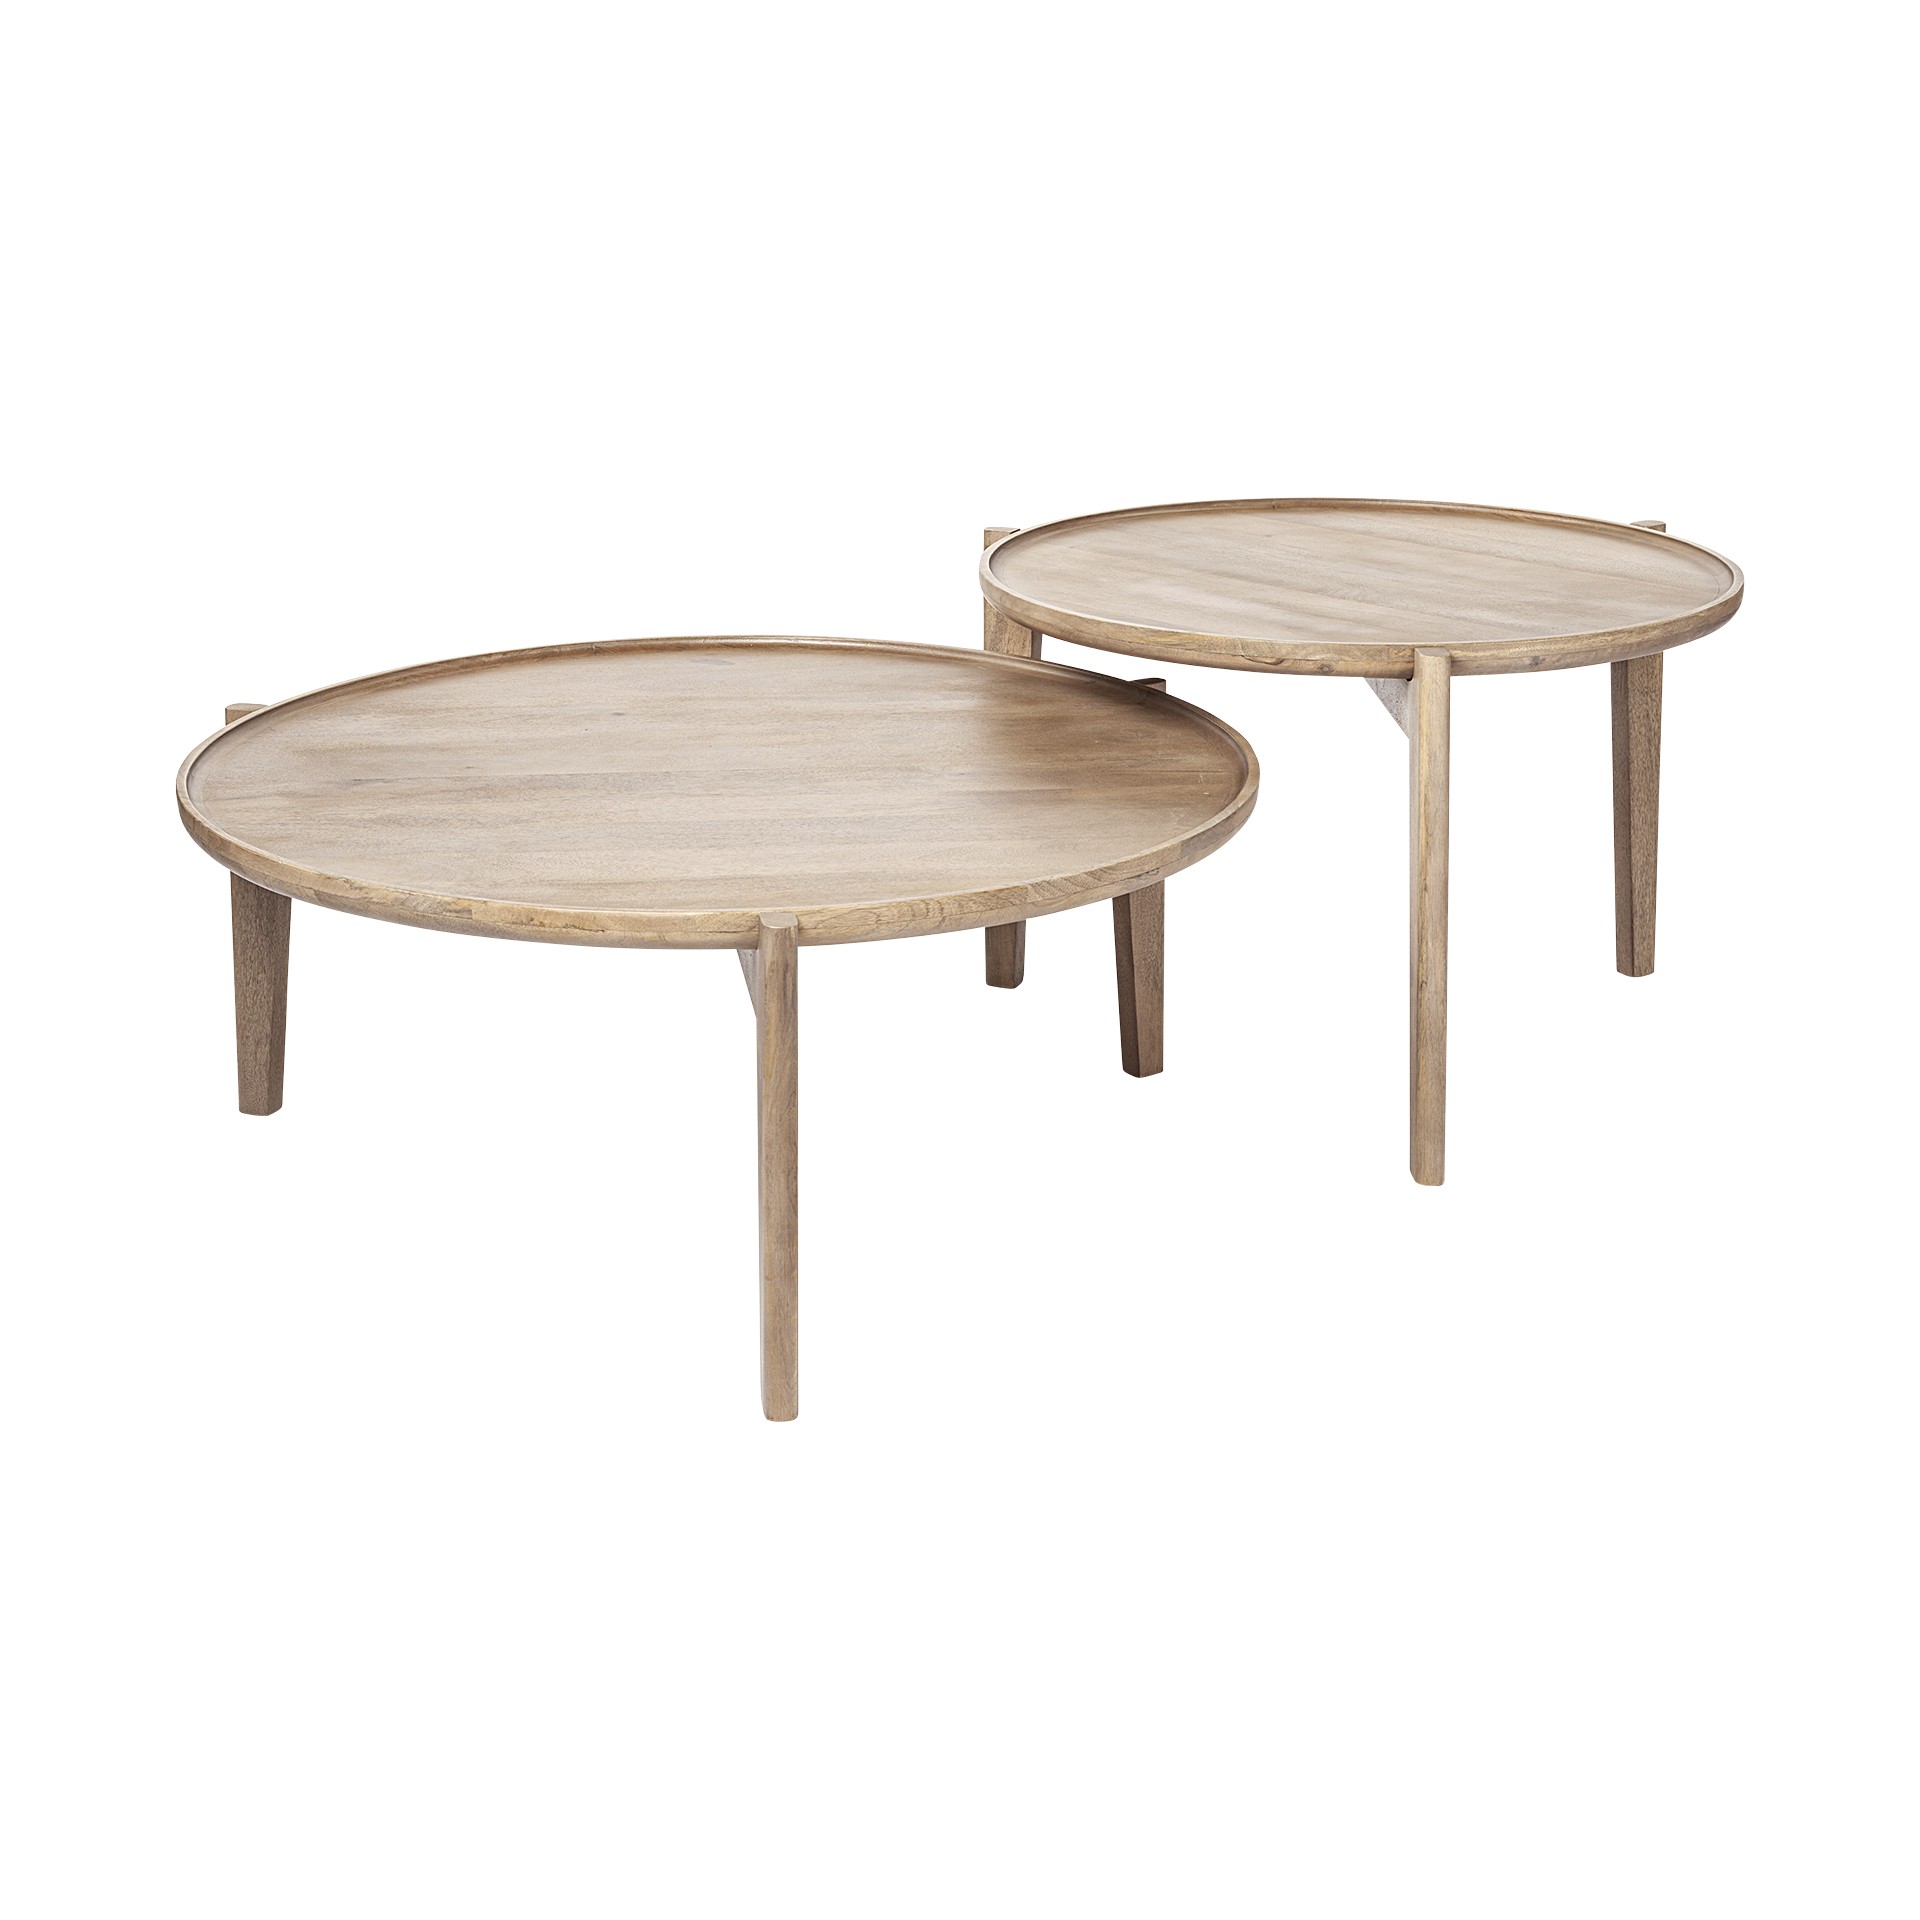 S 2 39.5" & 31.25" Round Solid Wood Nesting Coffee Tables